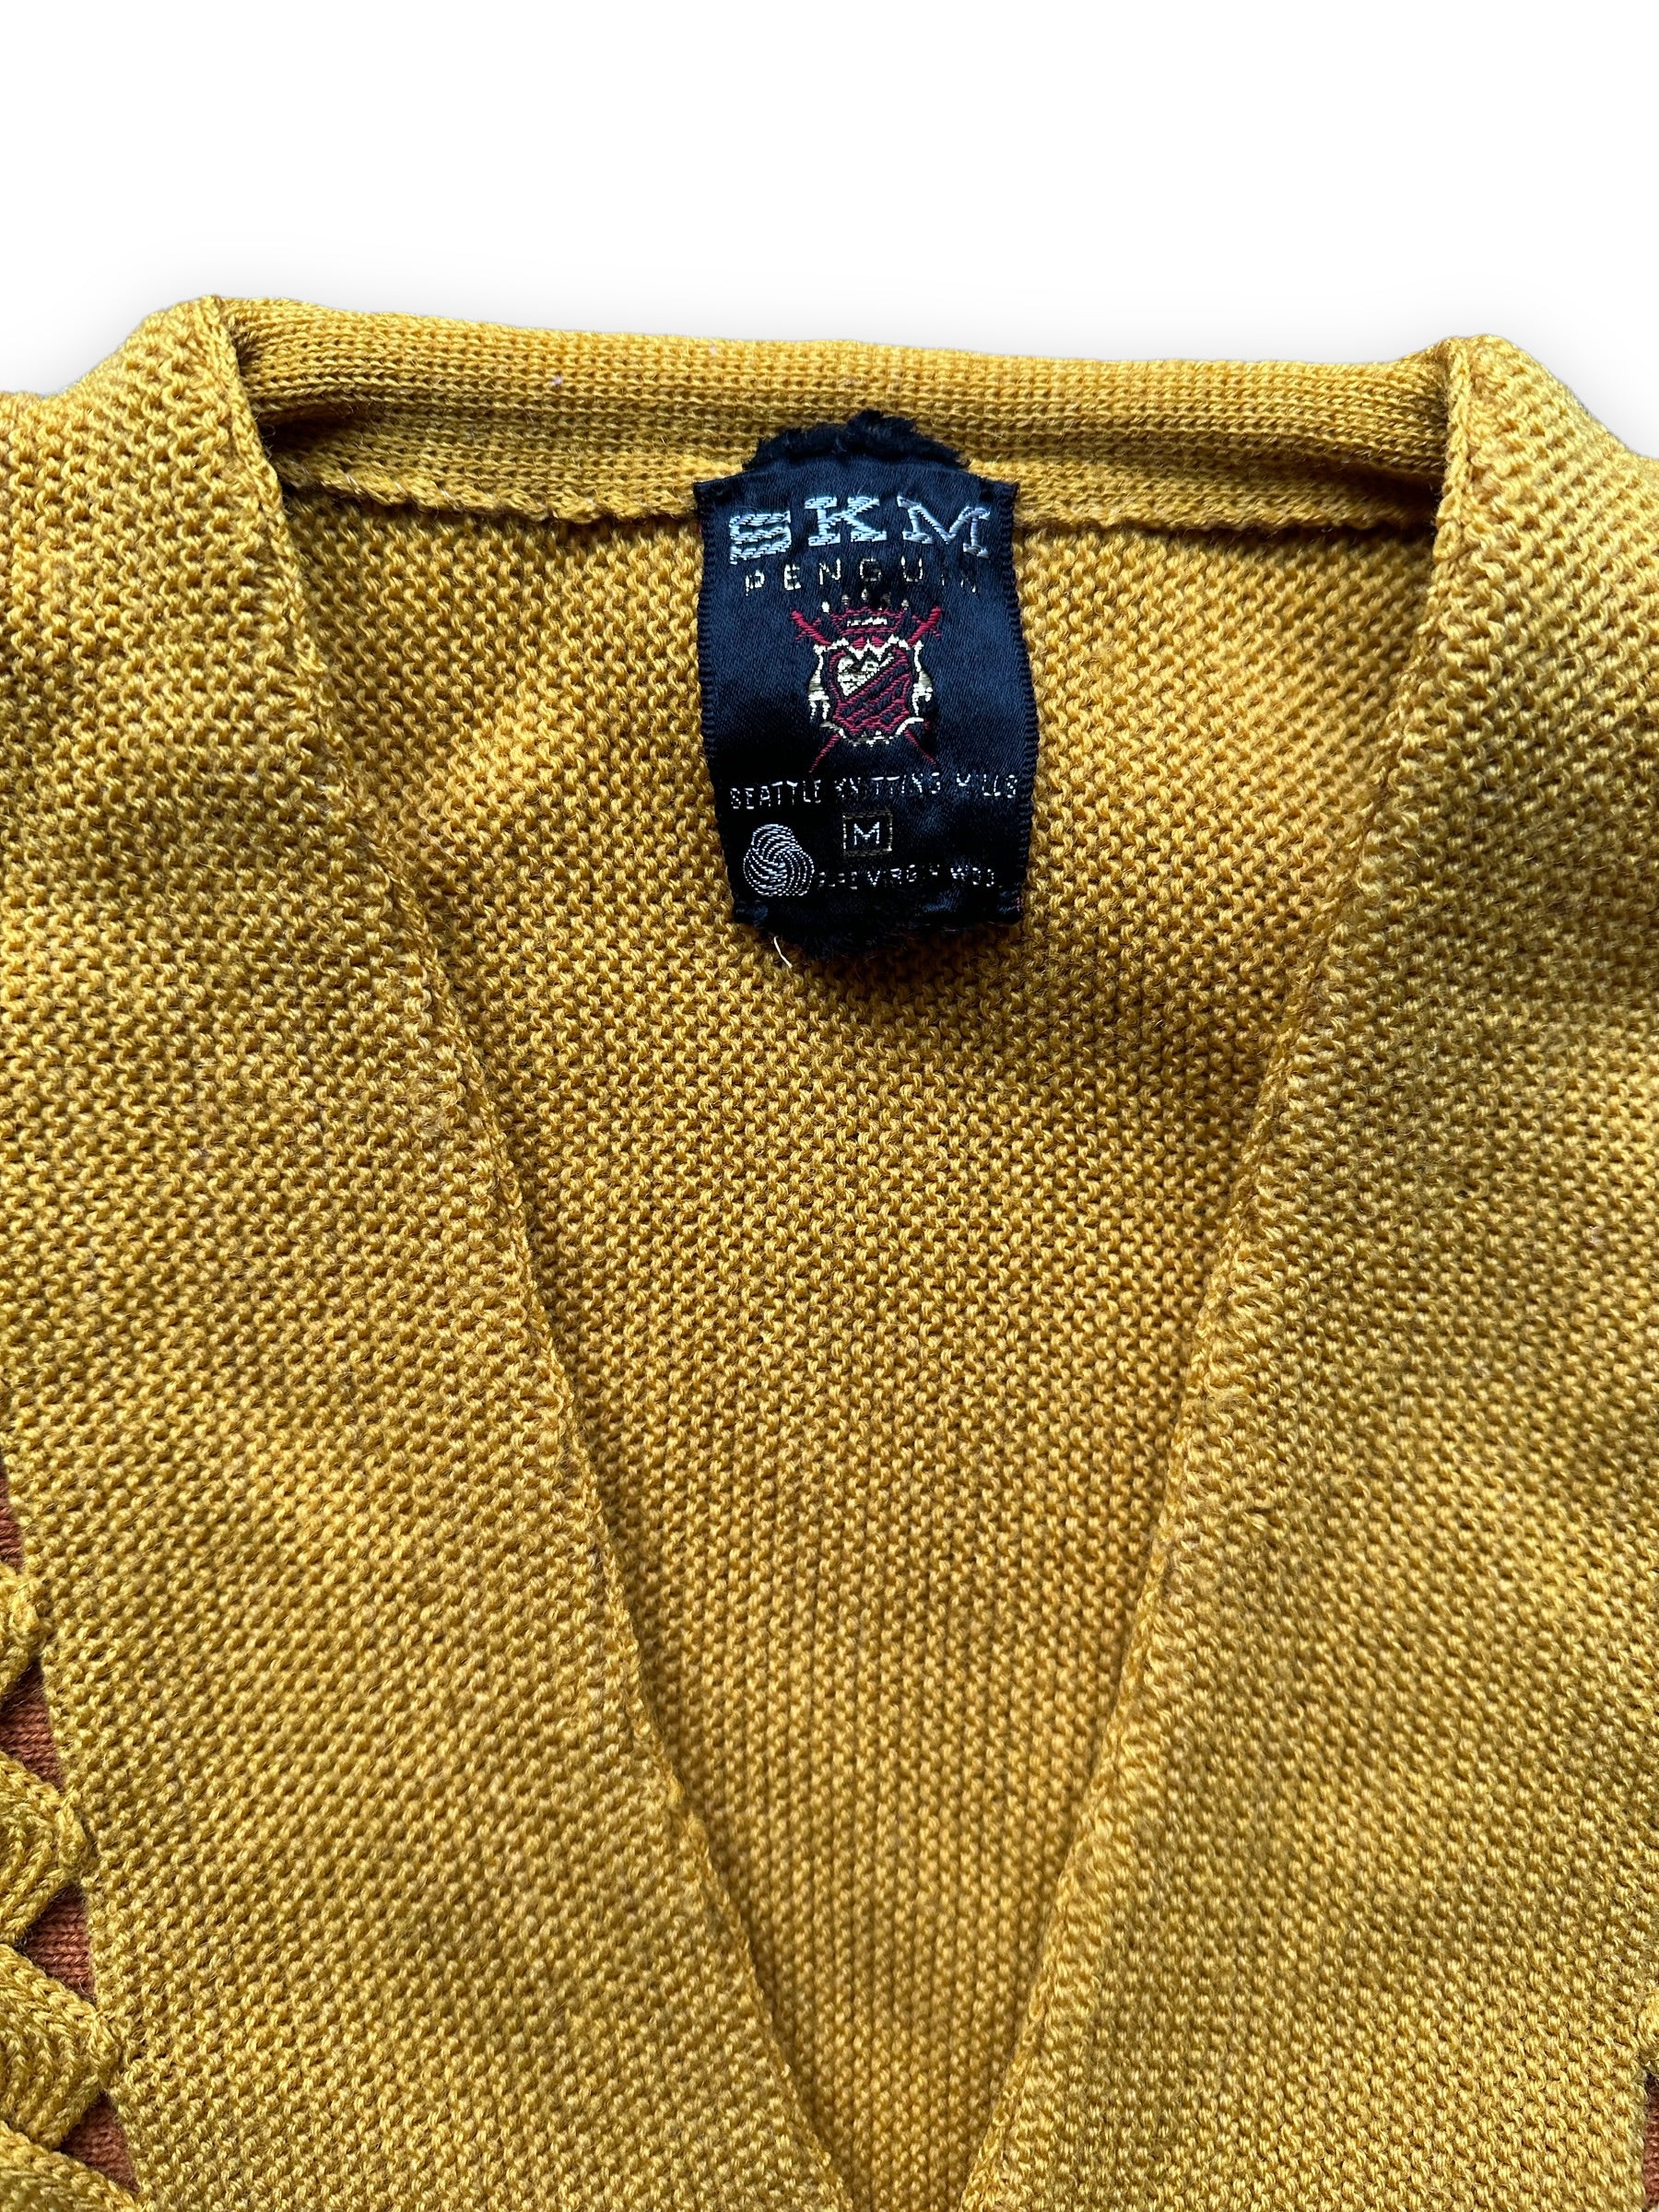 Tag View of Vintage Seattle Knitting Mills Golden Double Helix Wool Sweater SZ M |  Vintage Cardigan Sweaters Seattle | Barn Owl Vintage Seattle